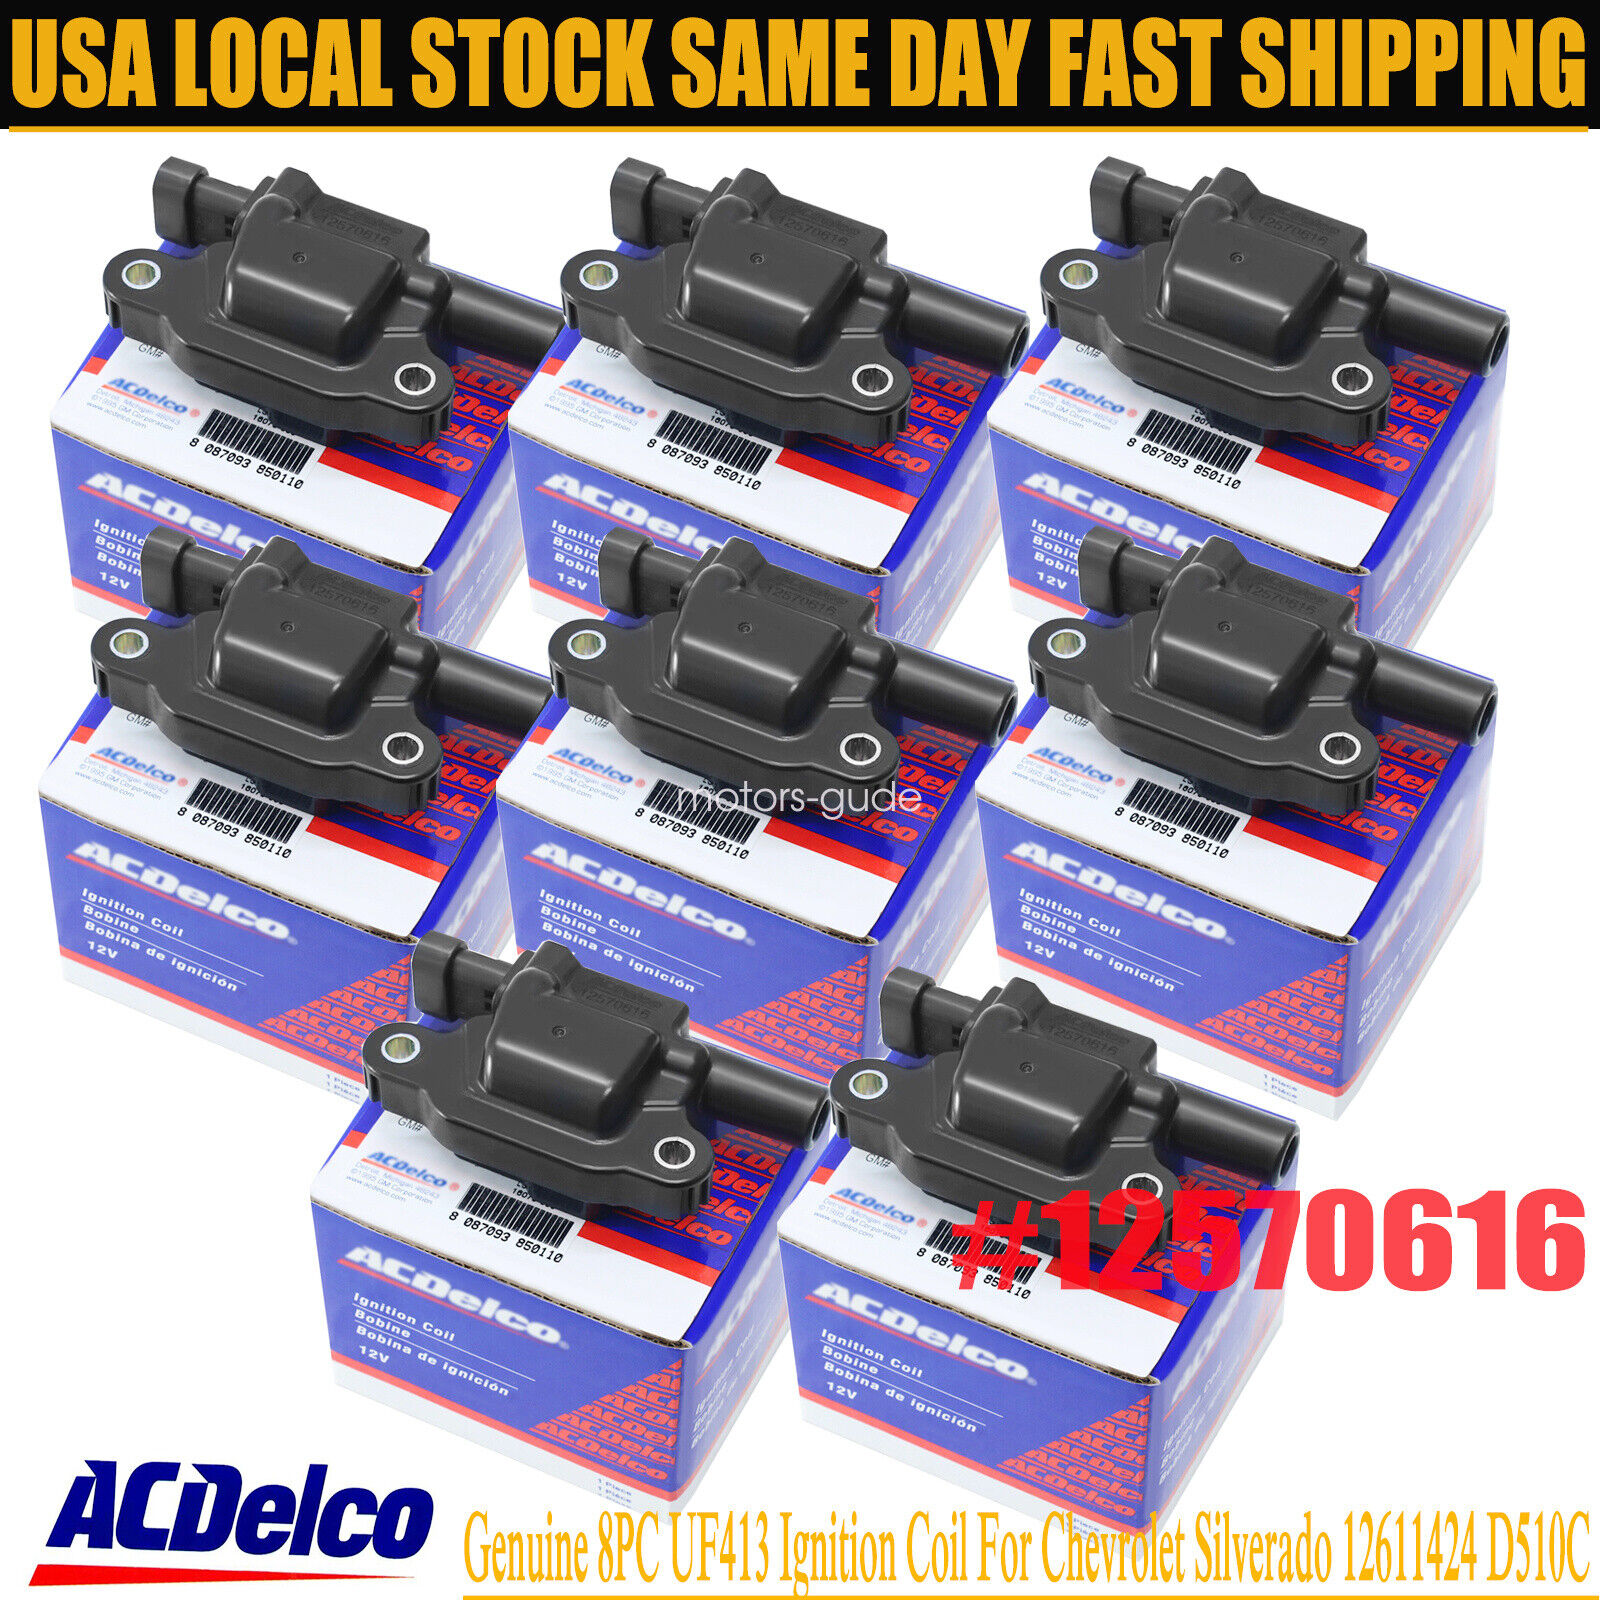 Genuine 8PCS Ignition Coil D510C For Chevrolet UF413 12570616 BSC1511 12611424